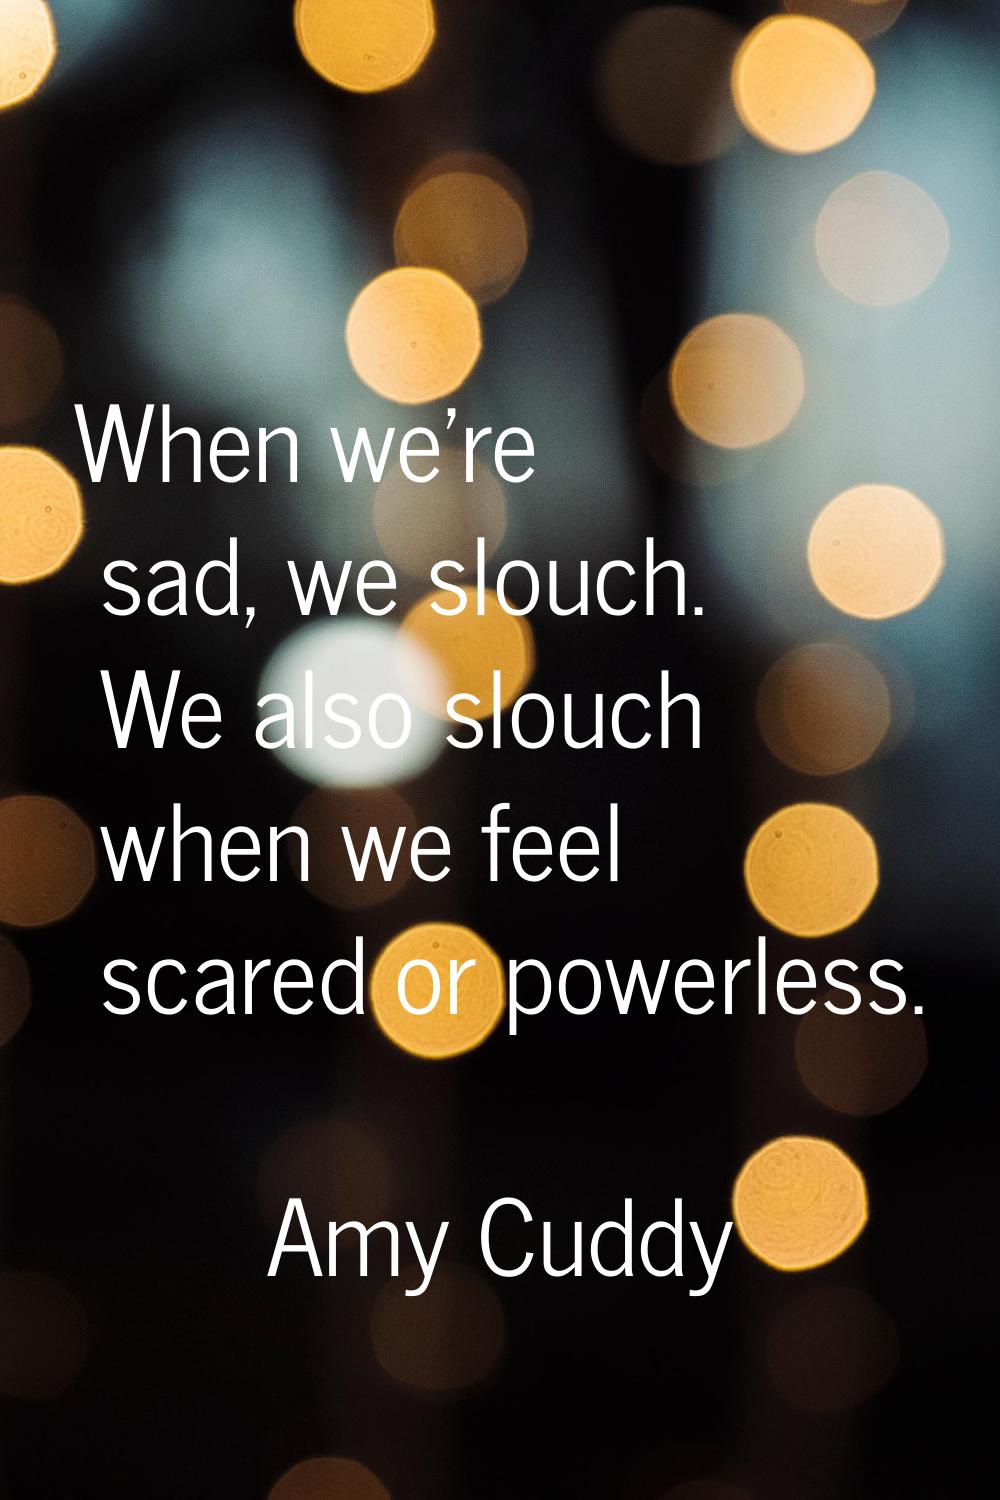 When we're sad, we slouch. We also slouch when we feel scared or powerless.